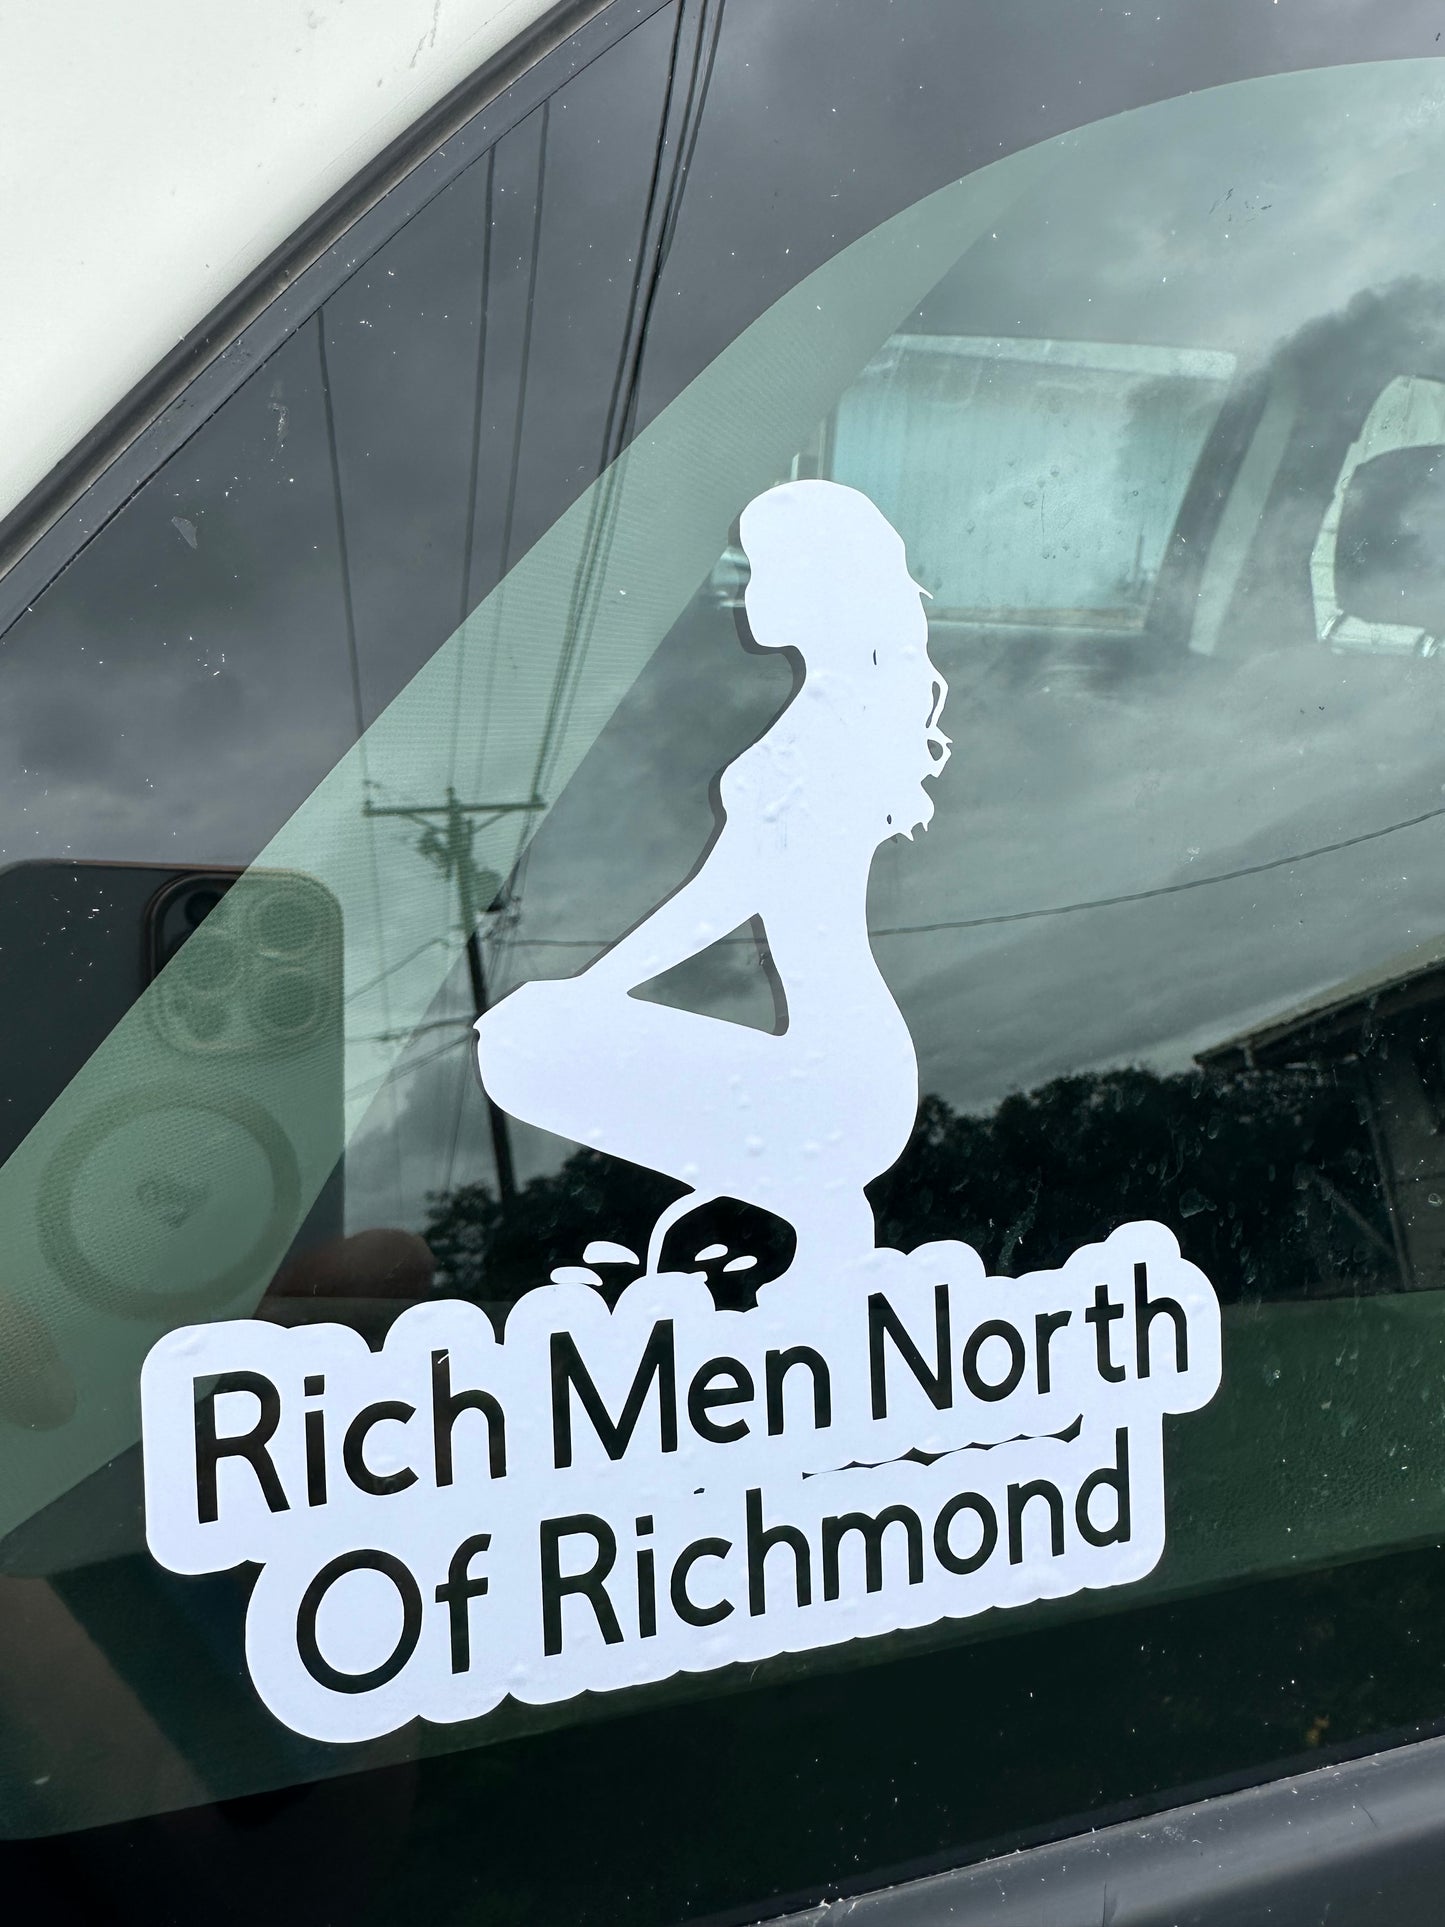 Piss on the rich men north of Richmond car decal